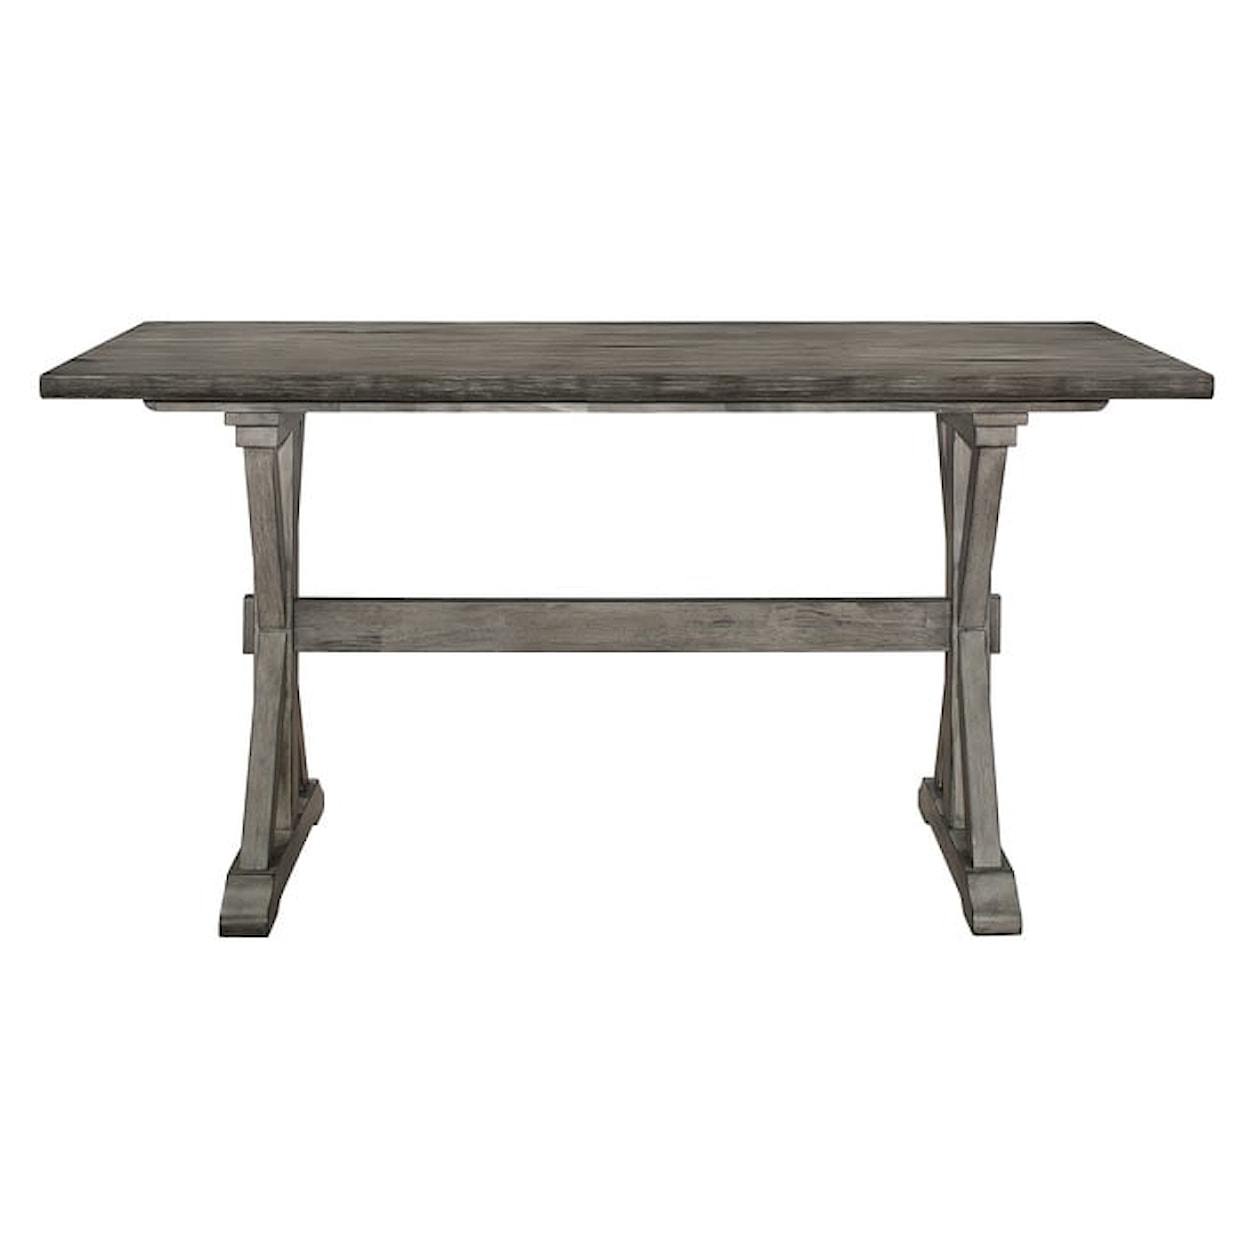 Homelegance Amsonia Counter Height Table